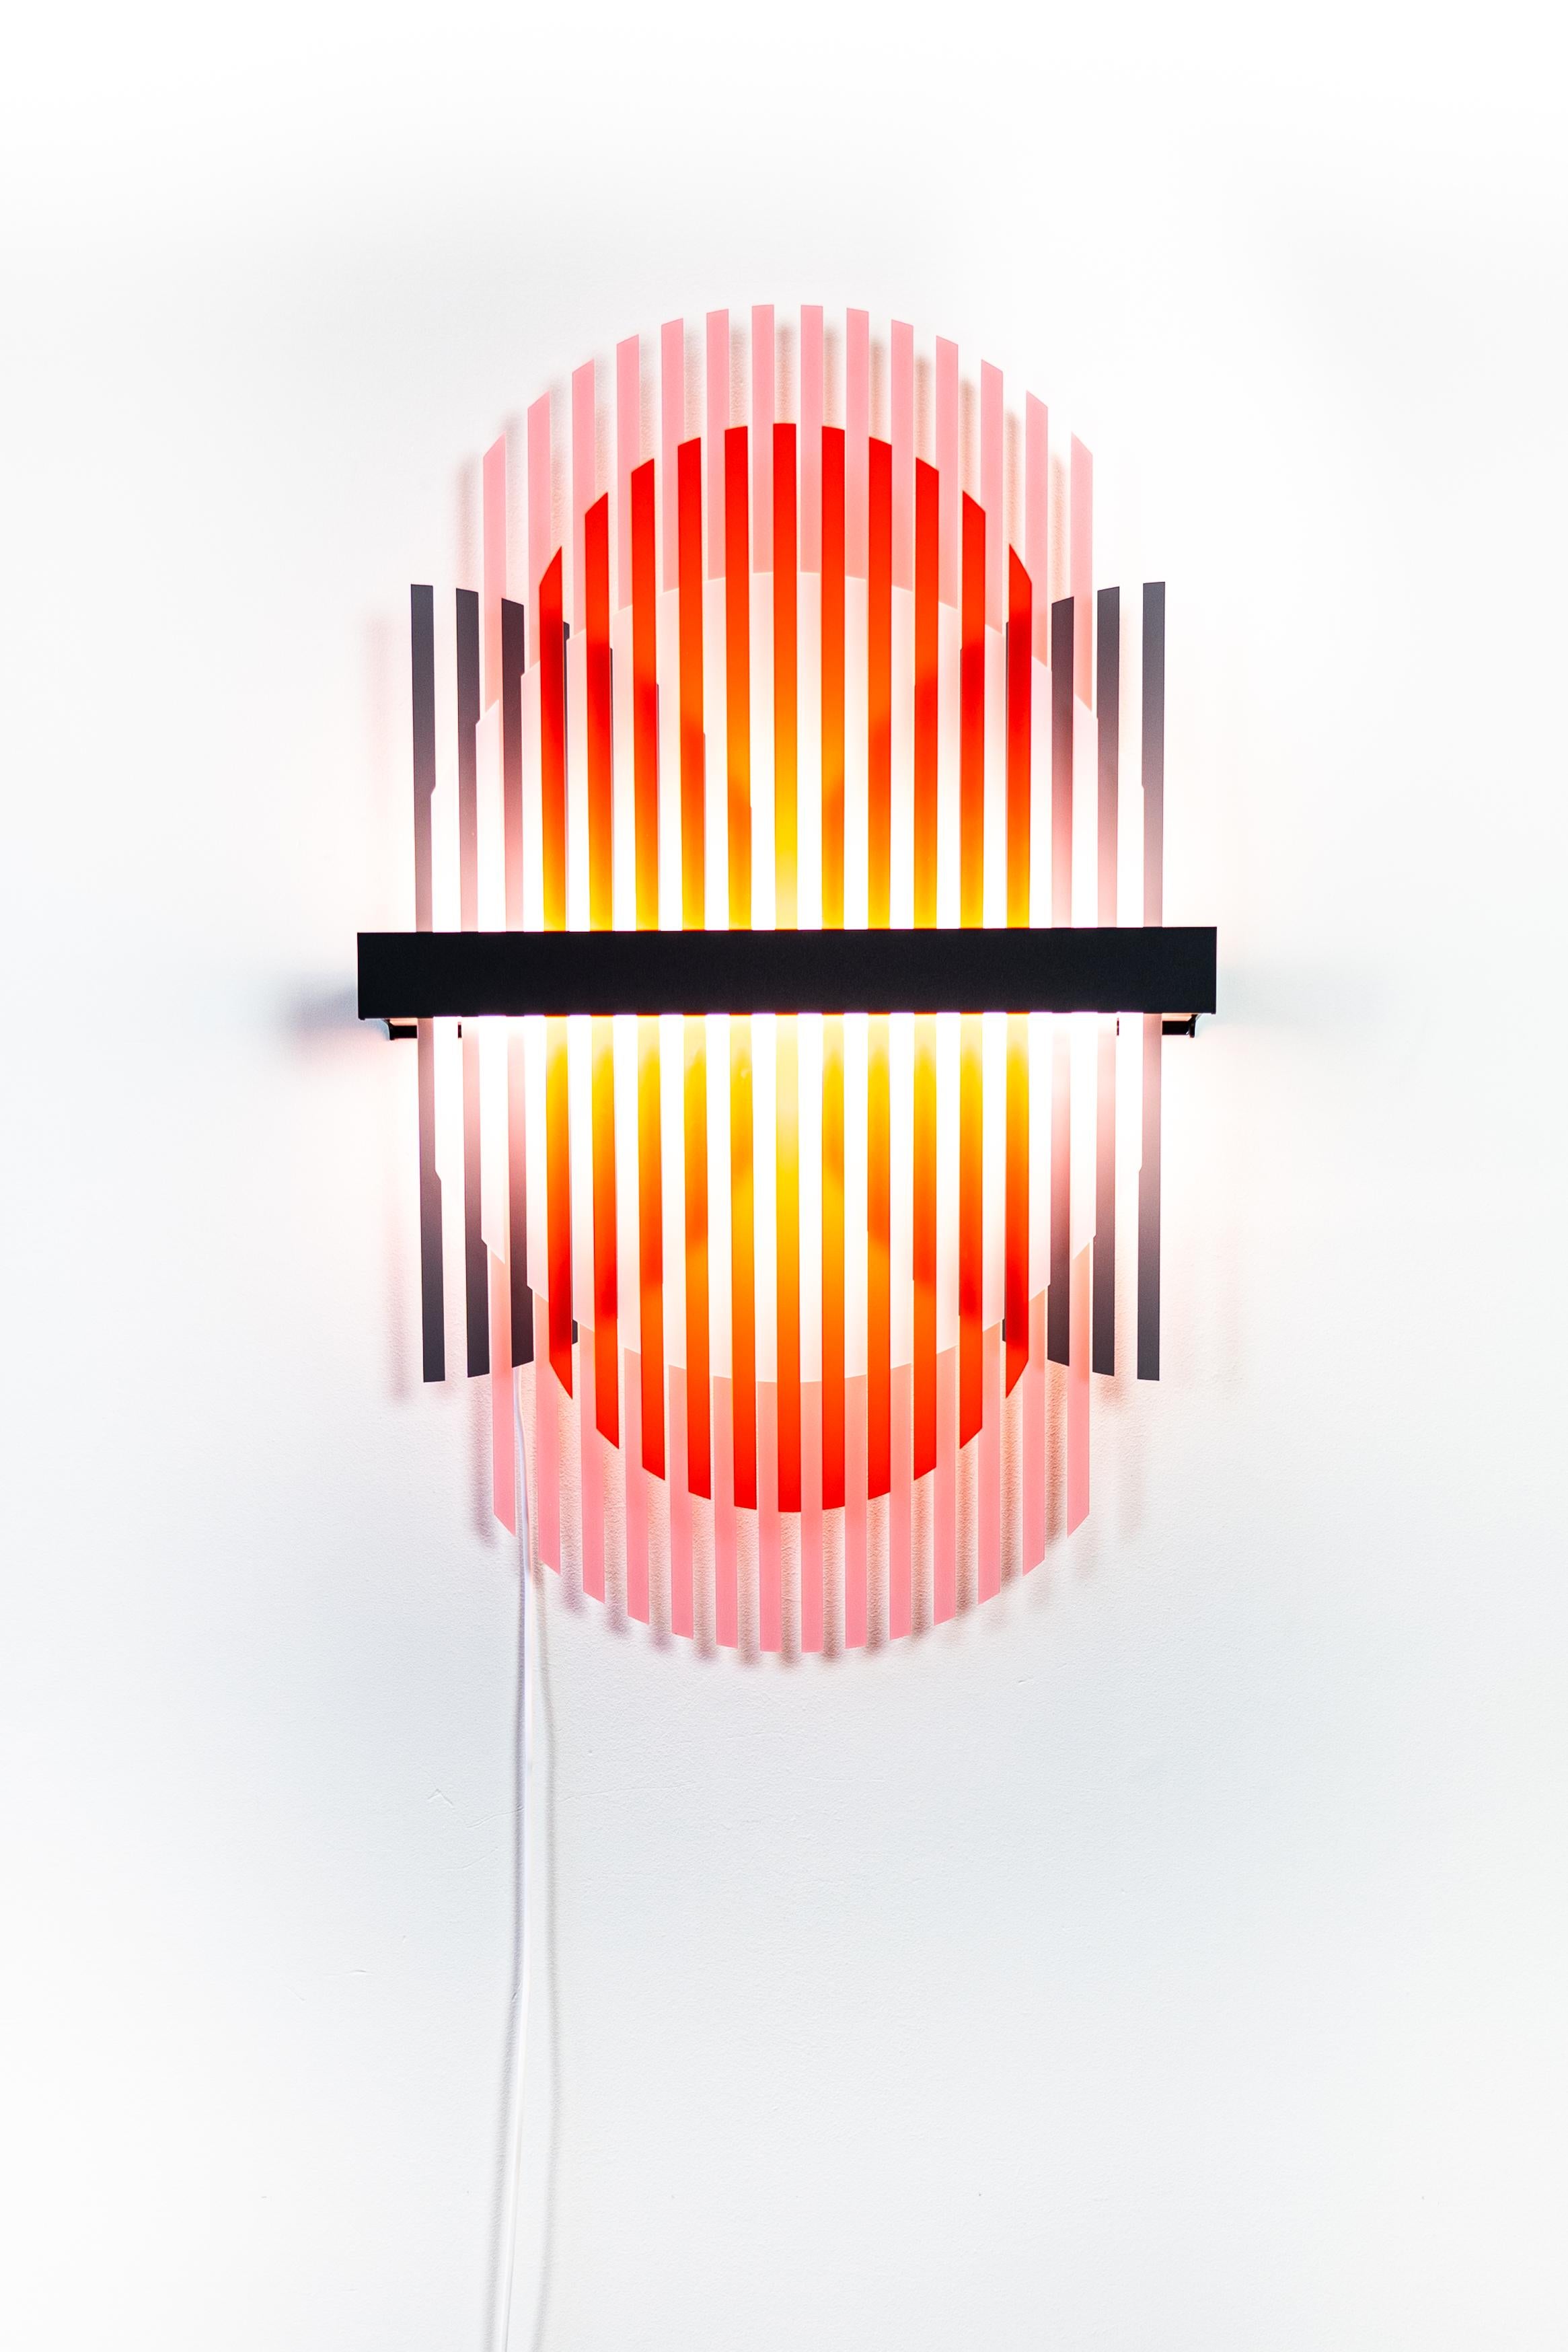 The new Lamina Light sculptures reveal a unique experience through distributing light between layered structures. The light sculpture creates fluctuating color patterns within its transparent slats. Various patterns are available for one light